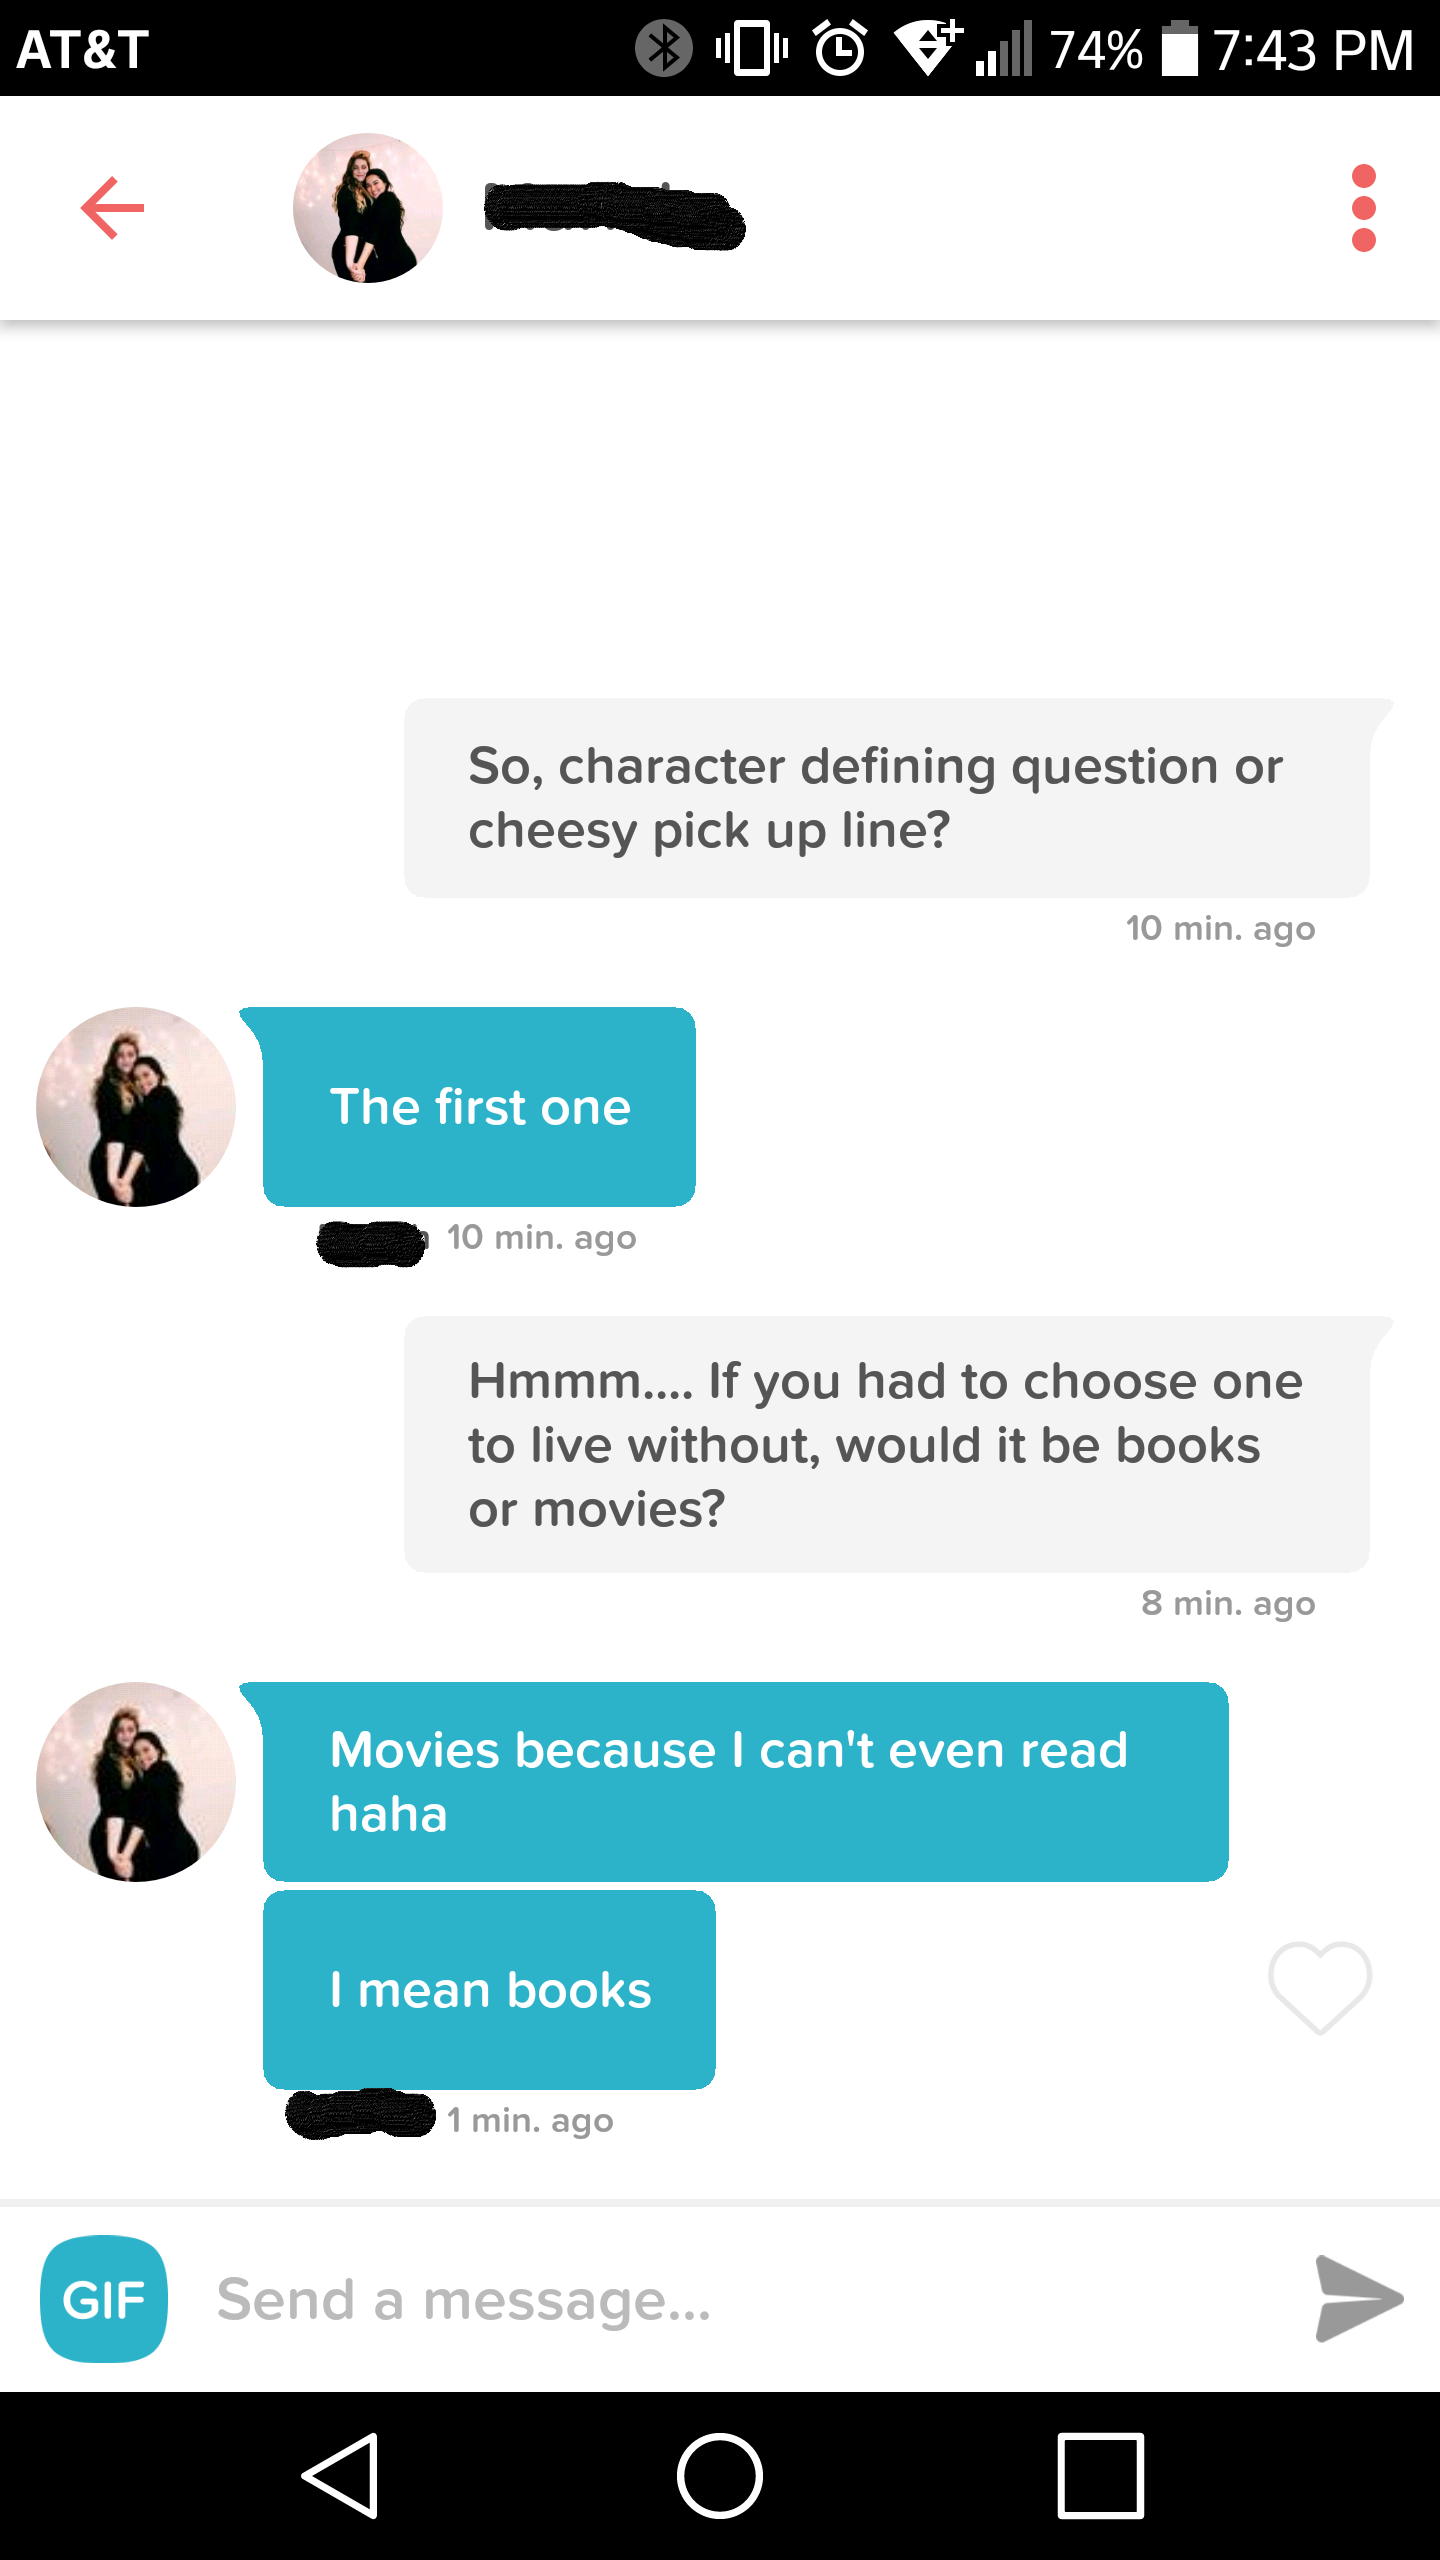 marissa tinder - At&T 0 . 74% So, character defining question or cheesy pick up line? 10 min. ago The first one 10 min. ago Hmmm.... If you had to choose one to live without, would it be books or movies? 8 min. ago Movies because I can't even read haha I 